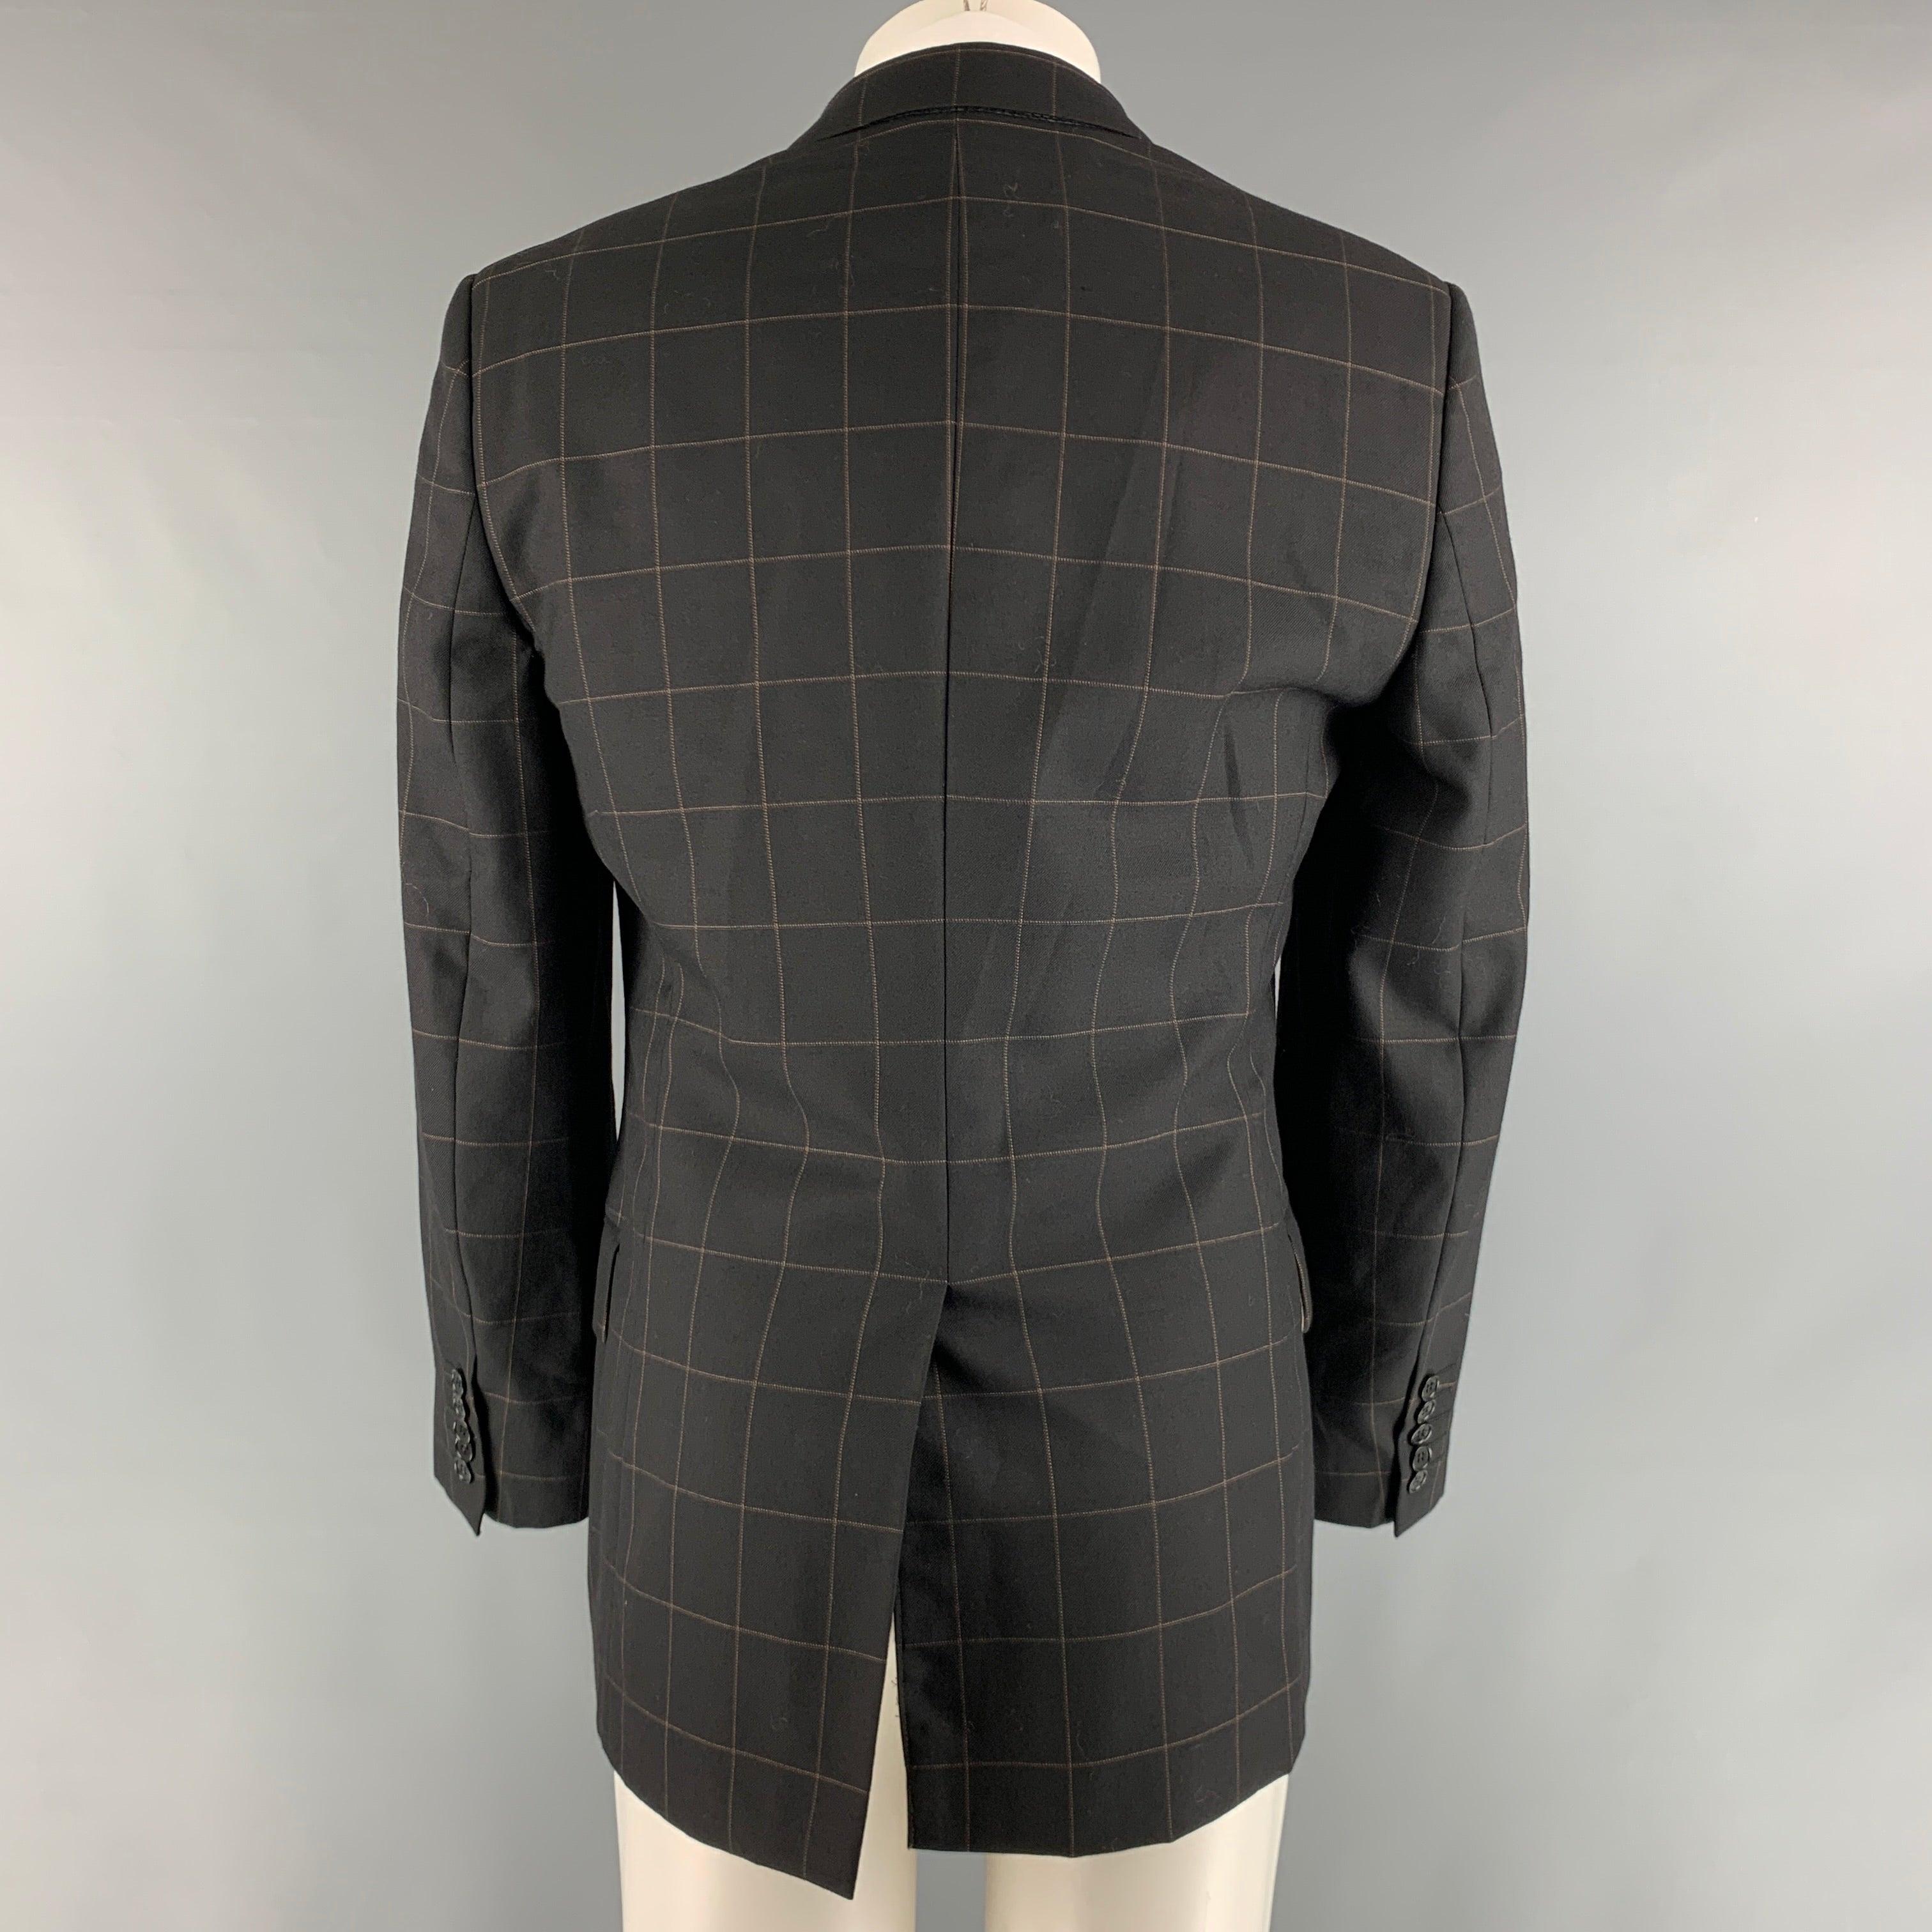 PAUL SMITH Size 40 Black Brown Window Pane Wool Cashmere Sport Coat In Excellent Condition For Sale In San Francisco, CA